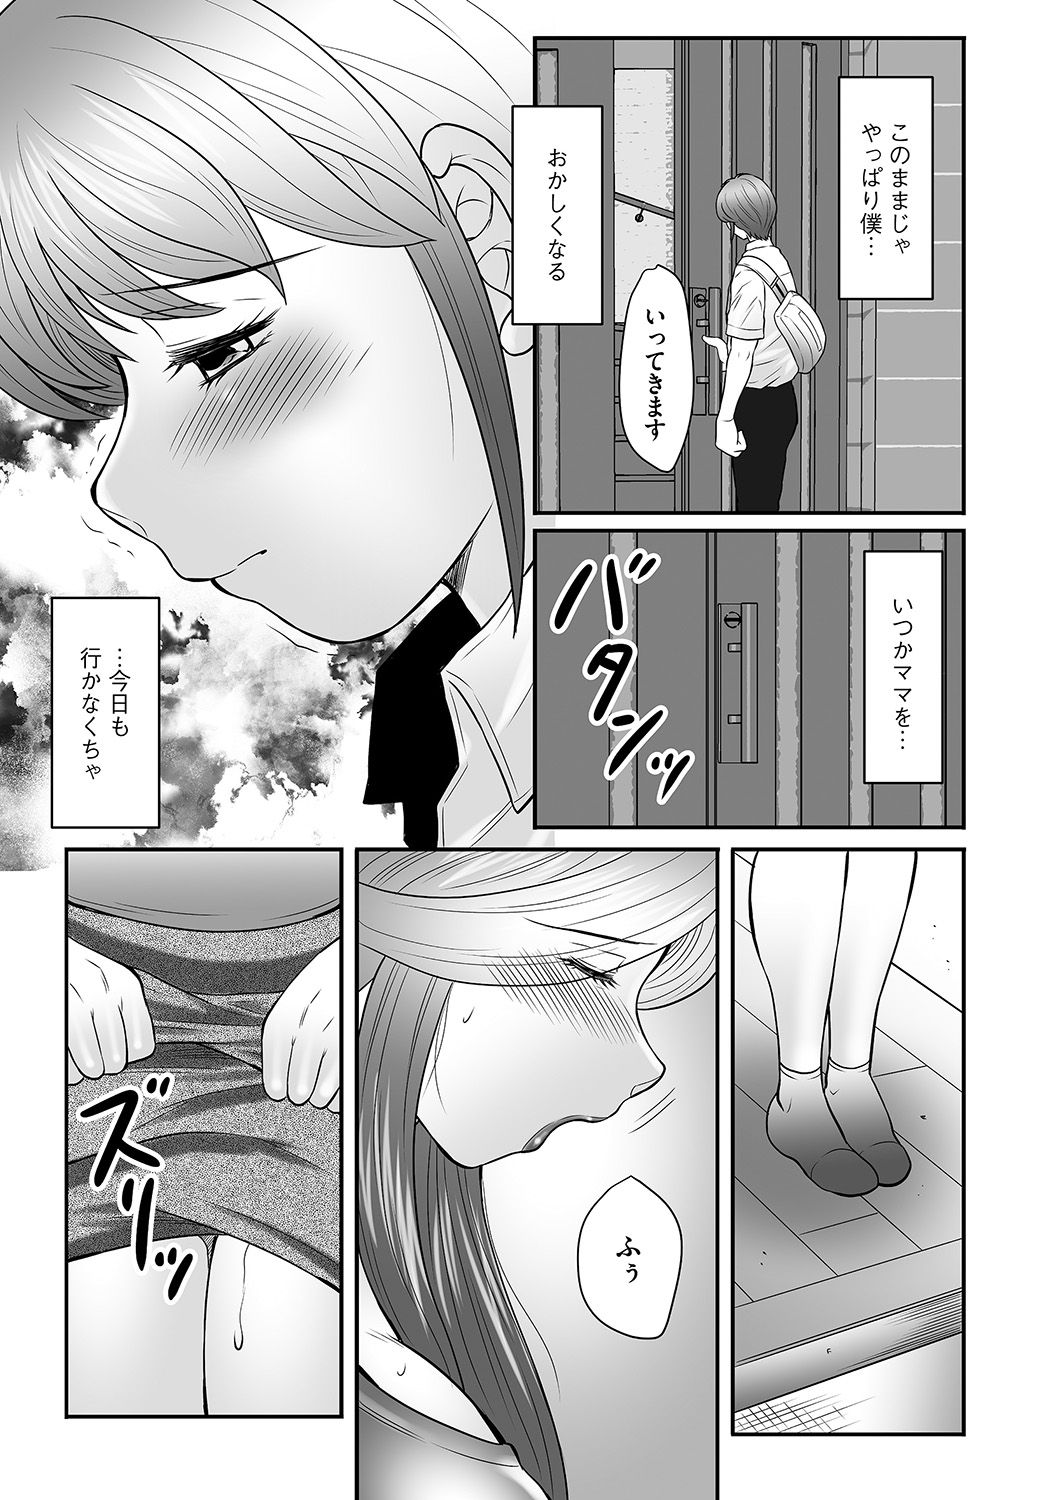 [Fuusen Club] Boshi no Susume - The advice of the mother and child Ch. 14 (Magazine Cyberia Vol. 73) [Digital] [風船クラブ] 母子のすすめ 第14話 (マガジンサイベリア Vol.73) [DL版]